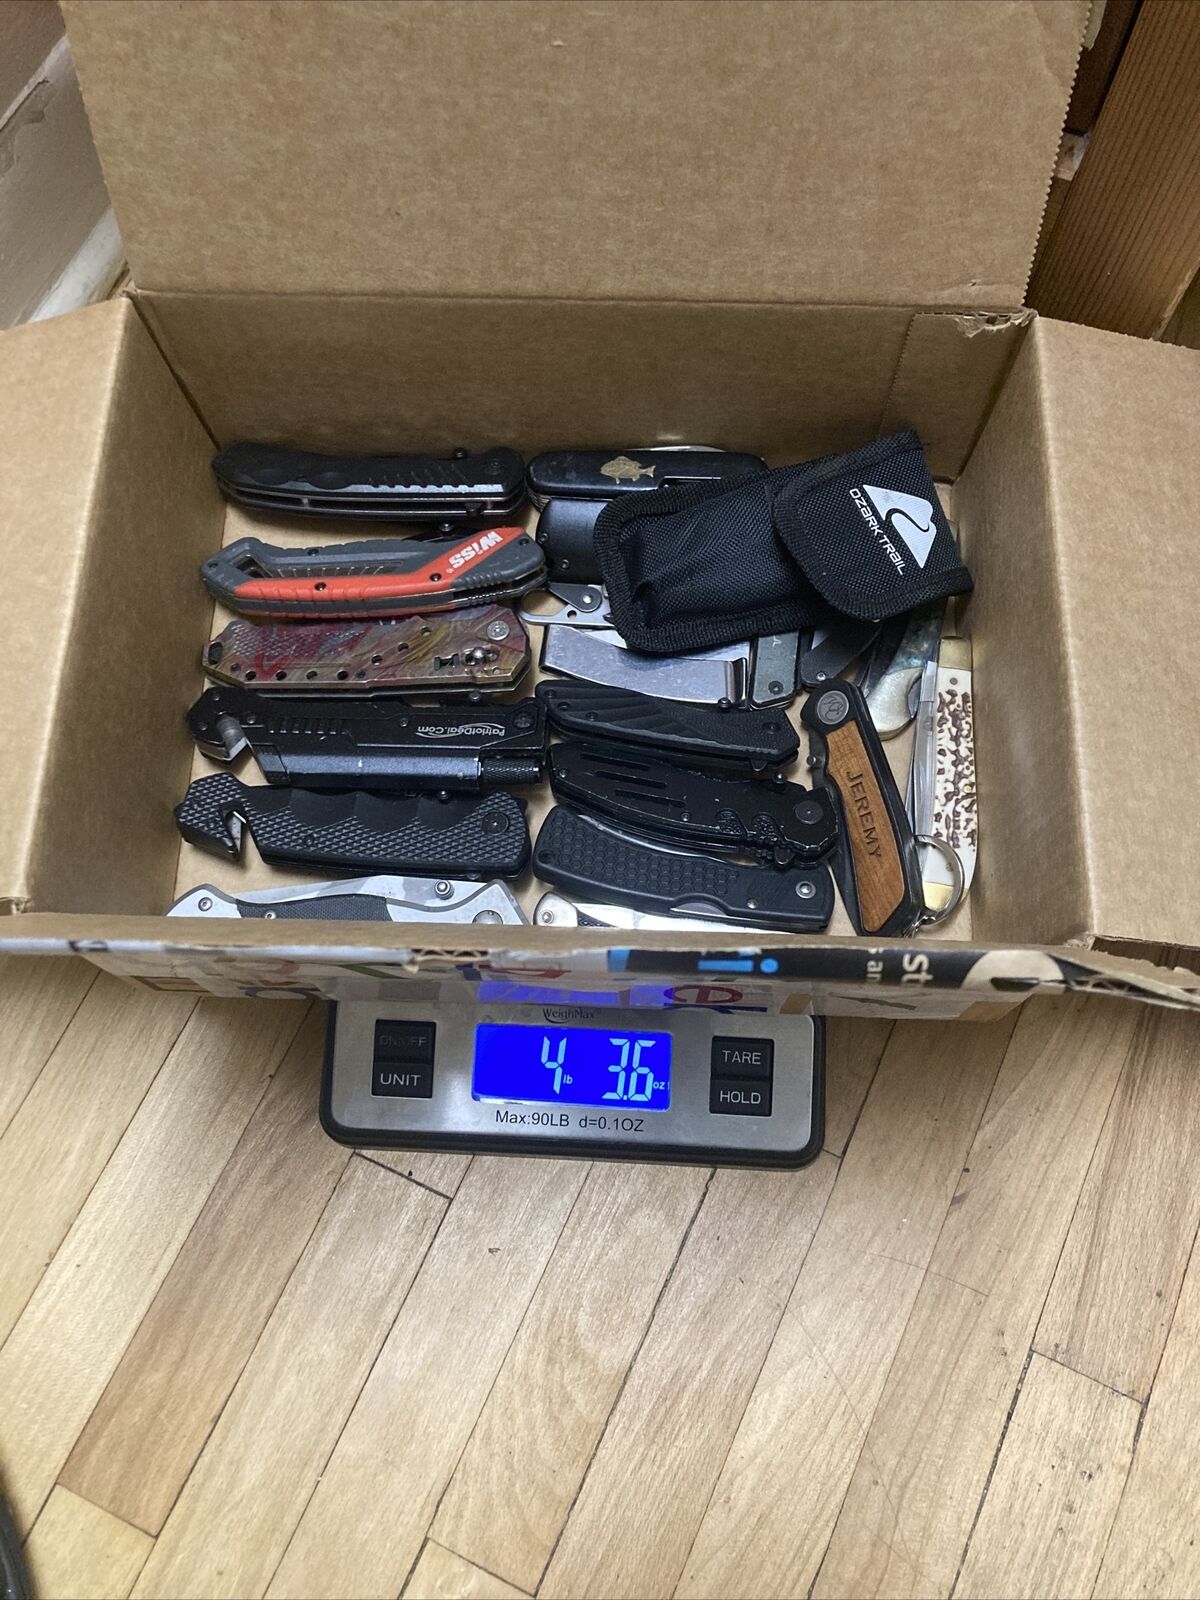 Just over 4LBS of TSA Confiscated Knives- OZARK TRAIL, TRUE, WISS, S&W, RR, etc.